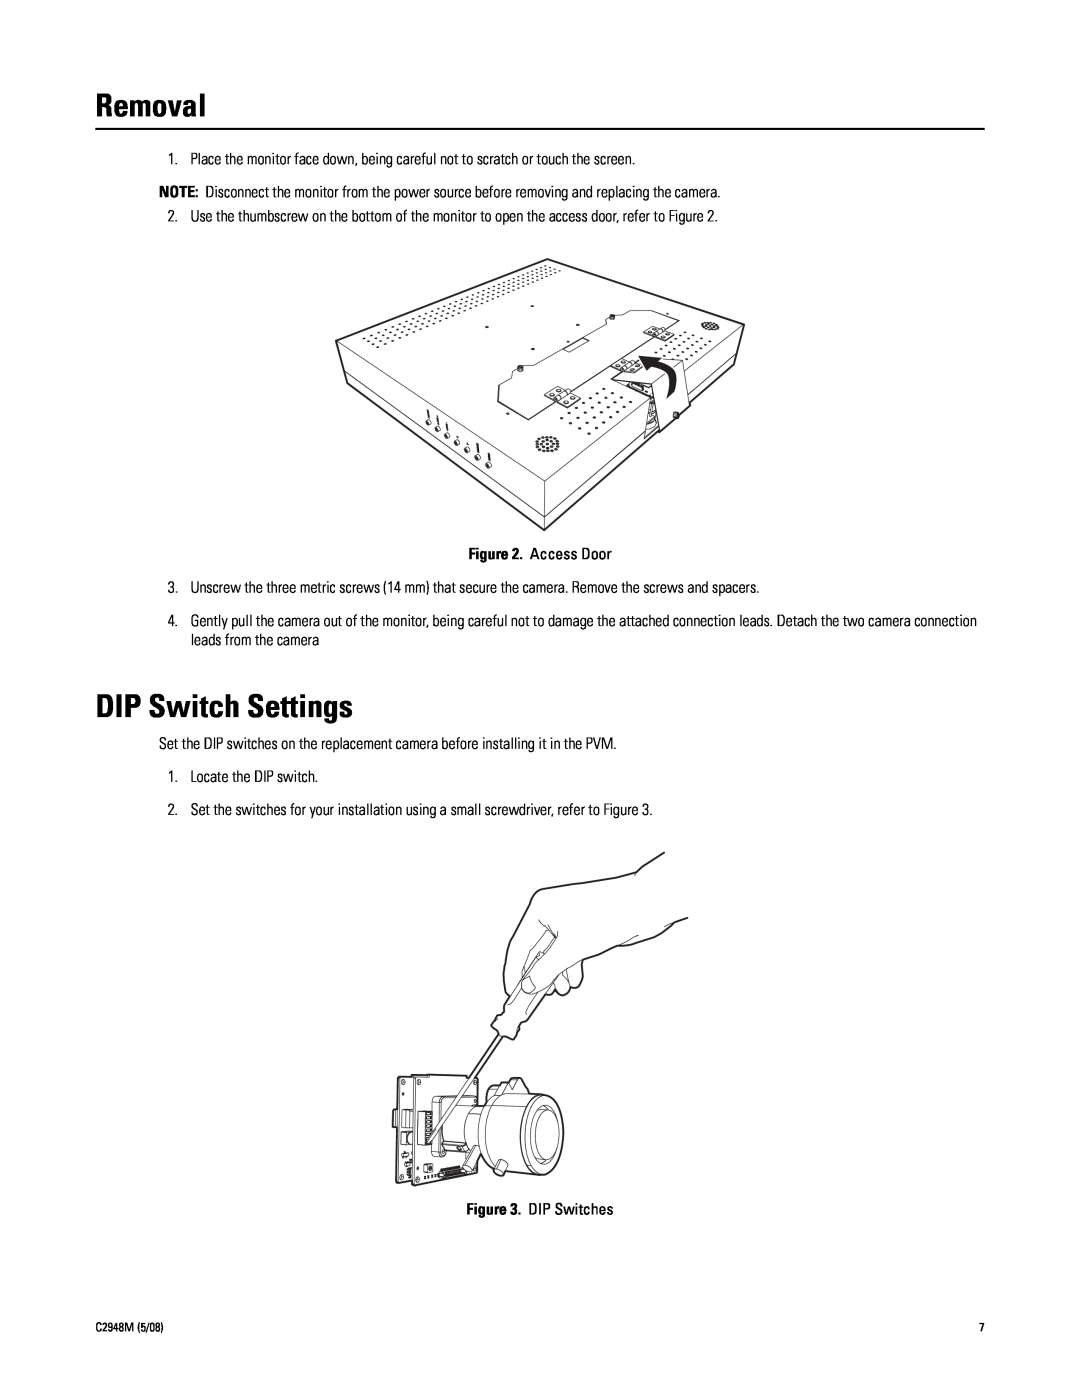 Pelco pmp-cwv9r manual Removal, DIP Switch Settings 